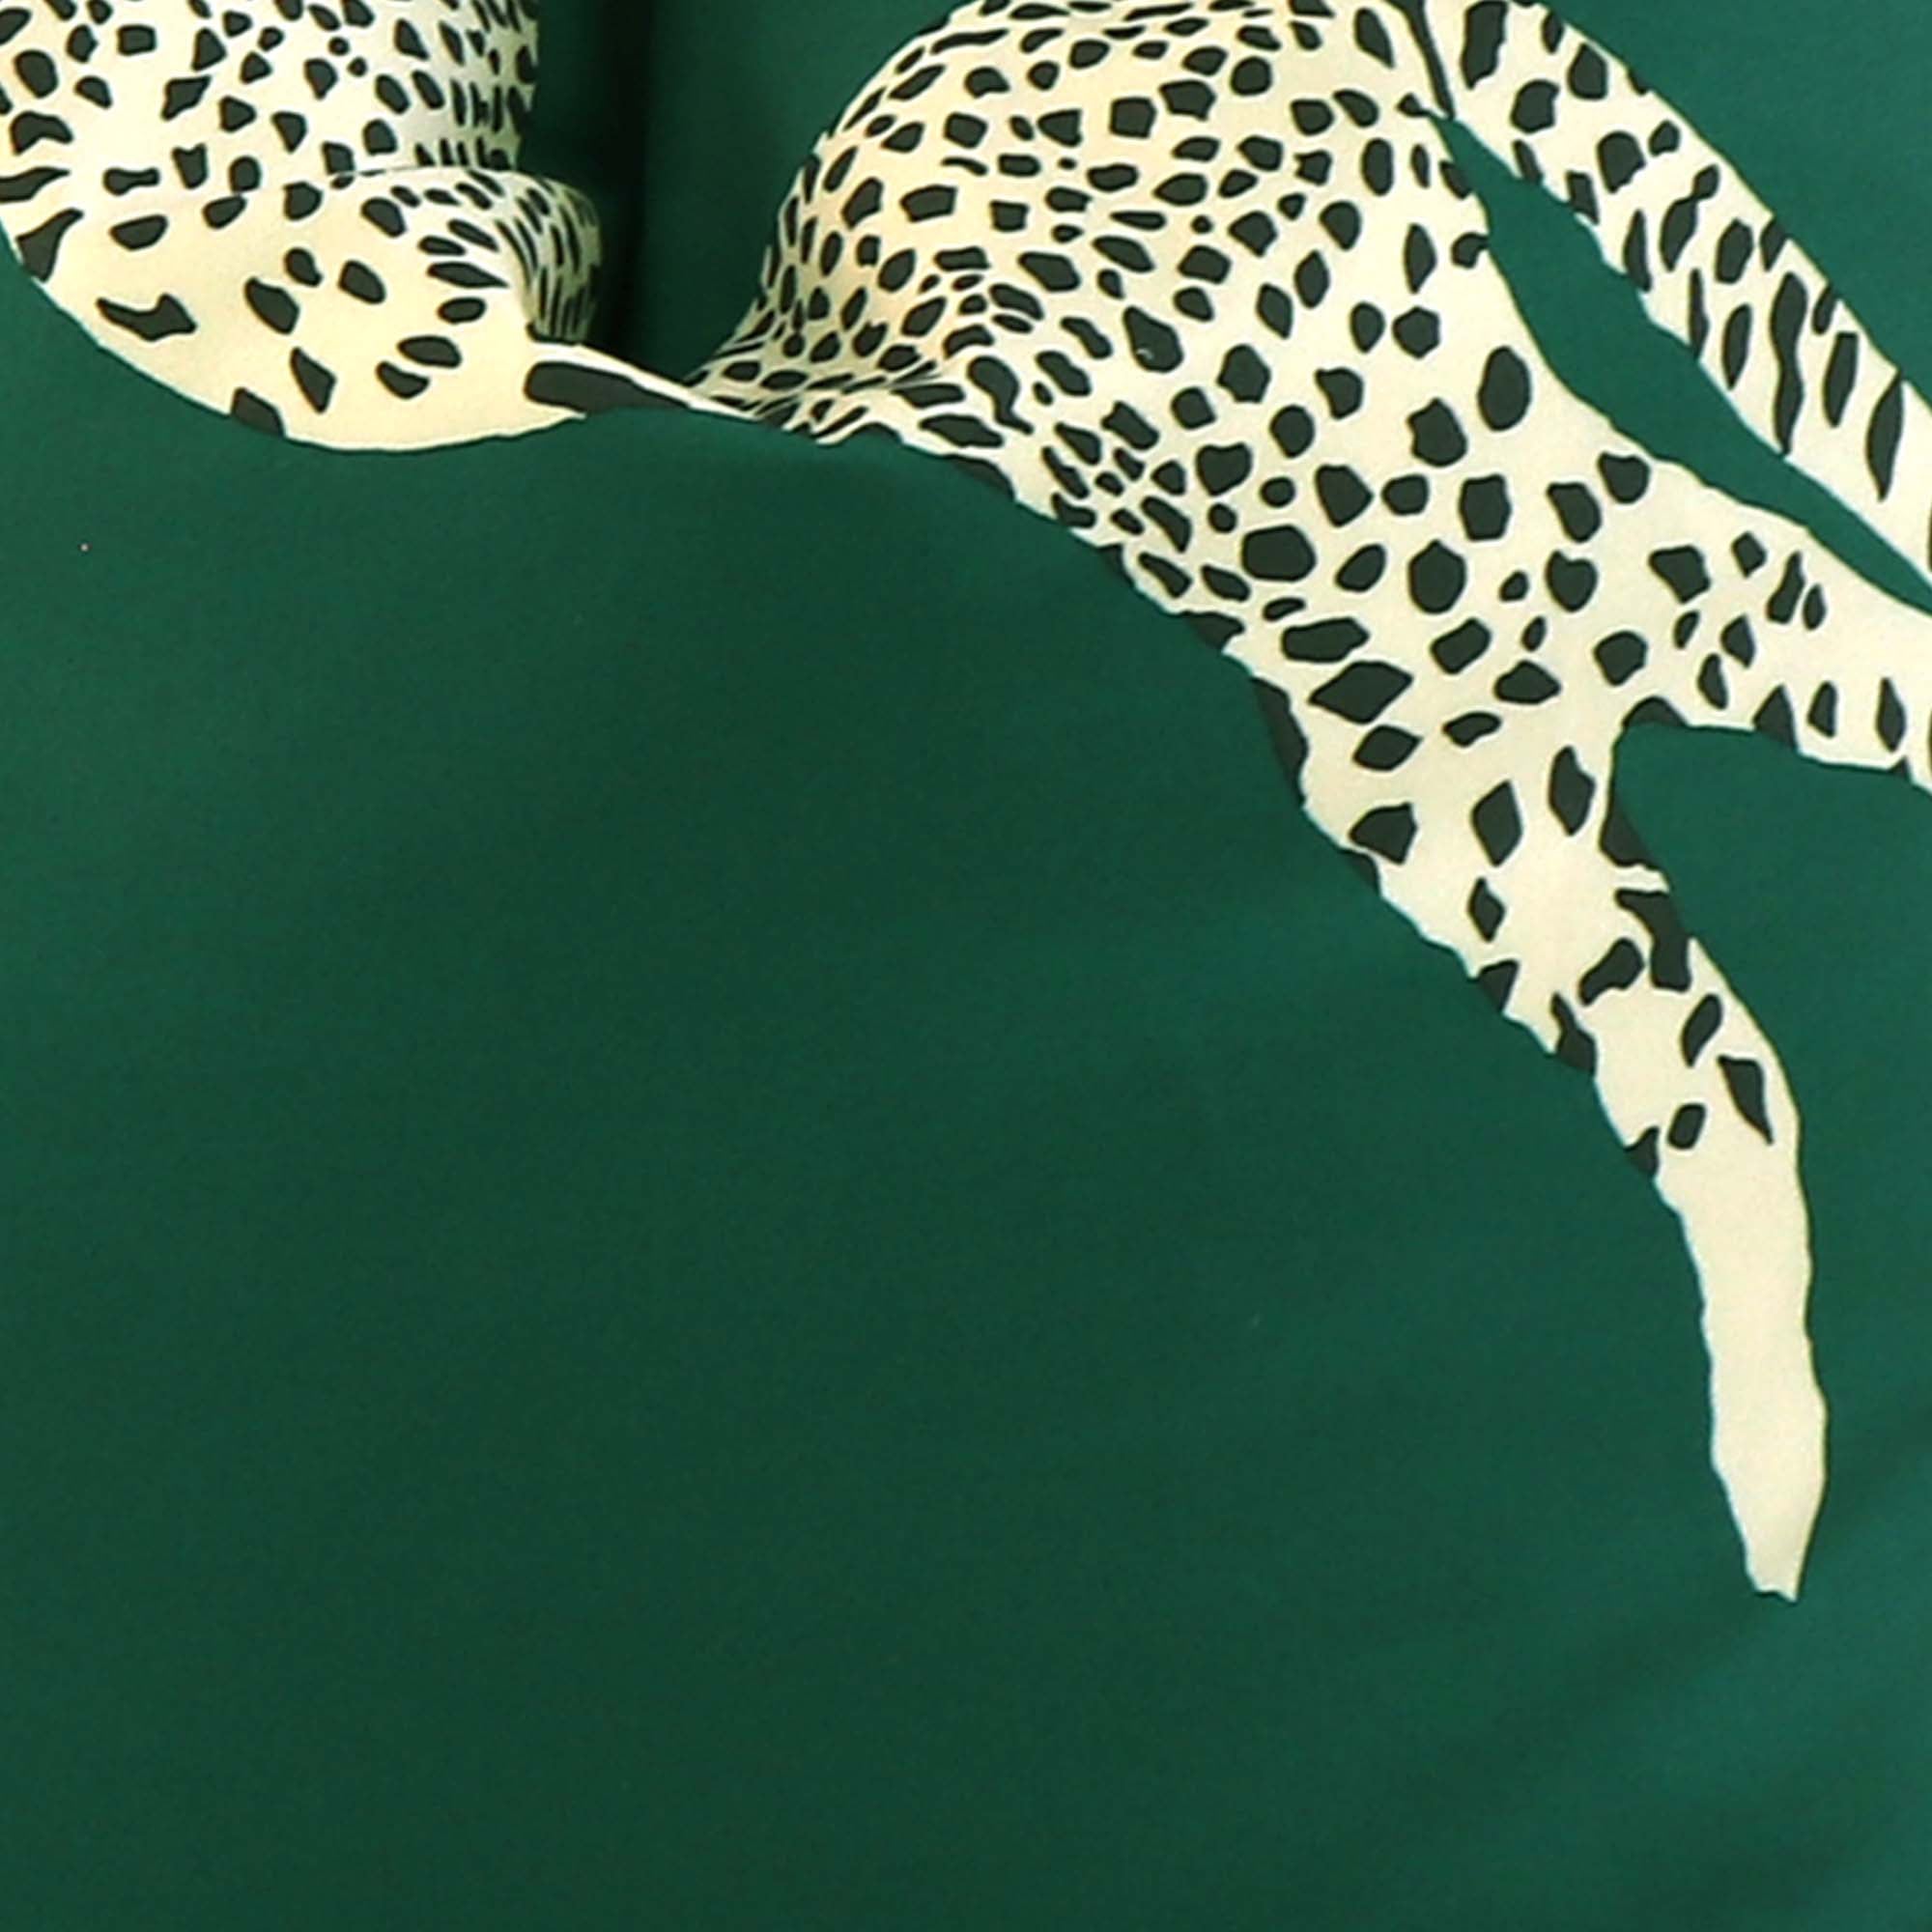 Leaping Cheetah Evergreen / 4x4 inch Fabric Swatch